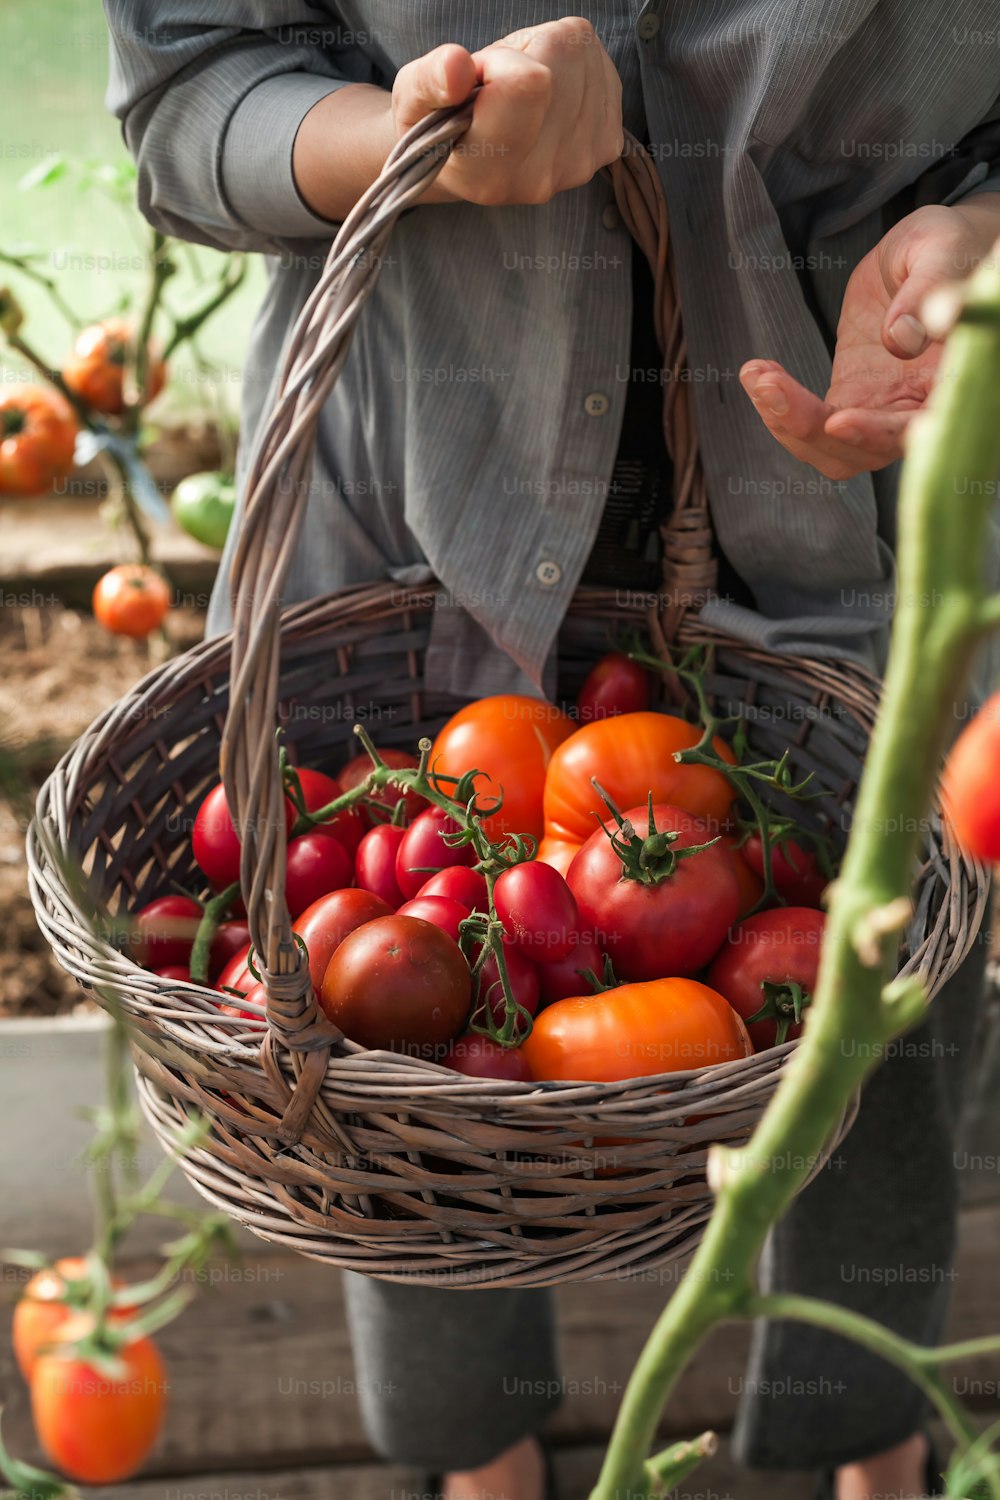 a person holding a basket full of tomatoes